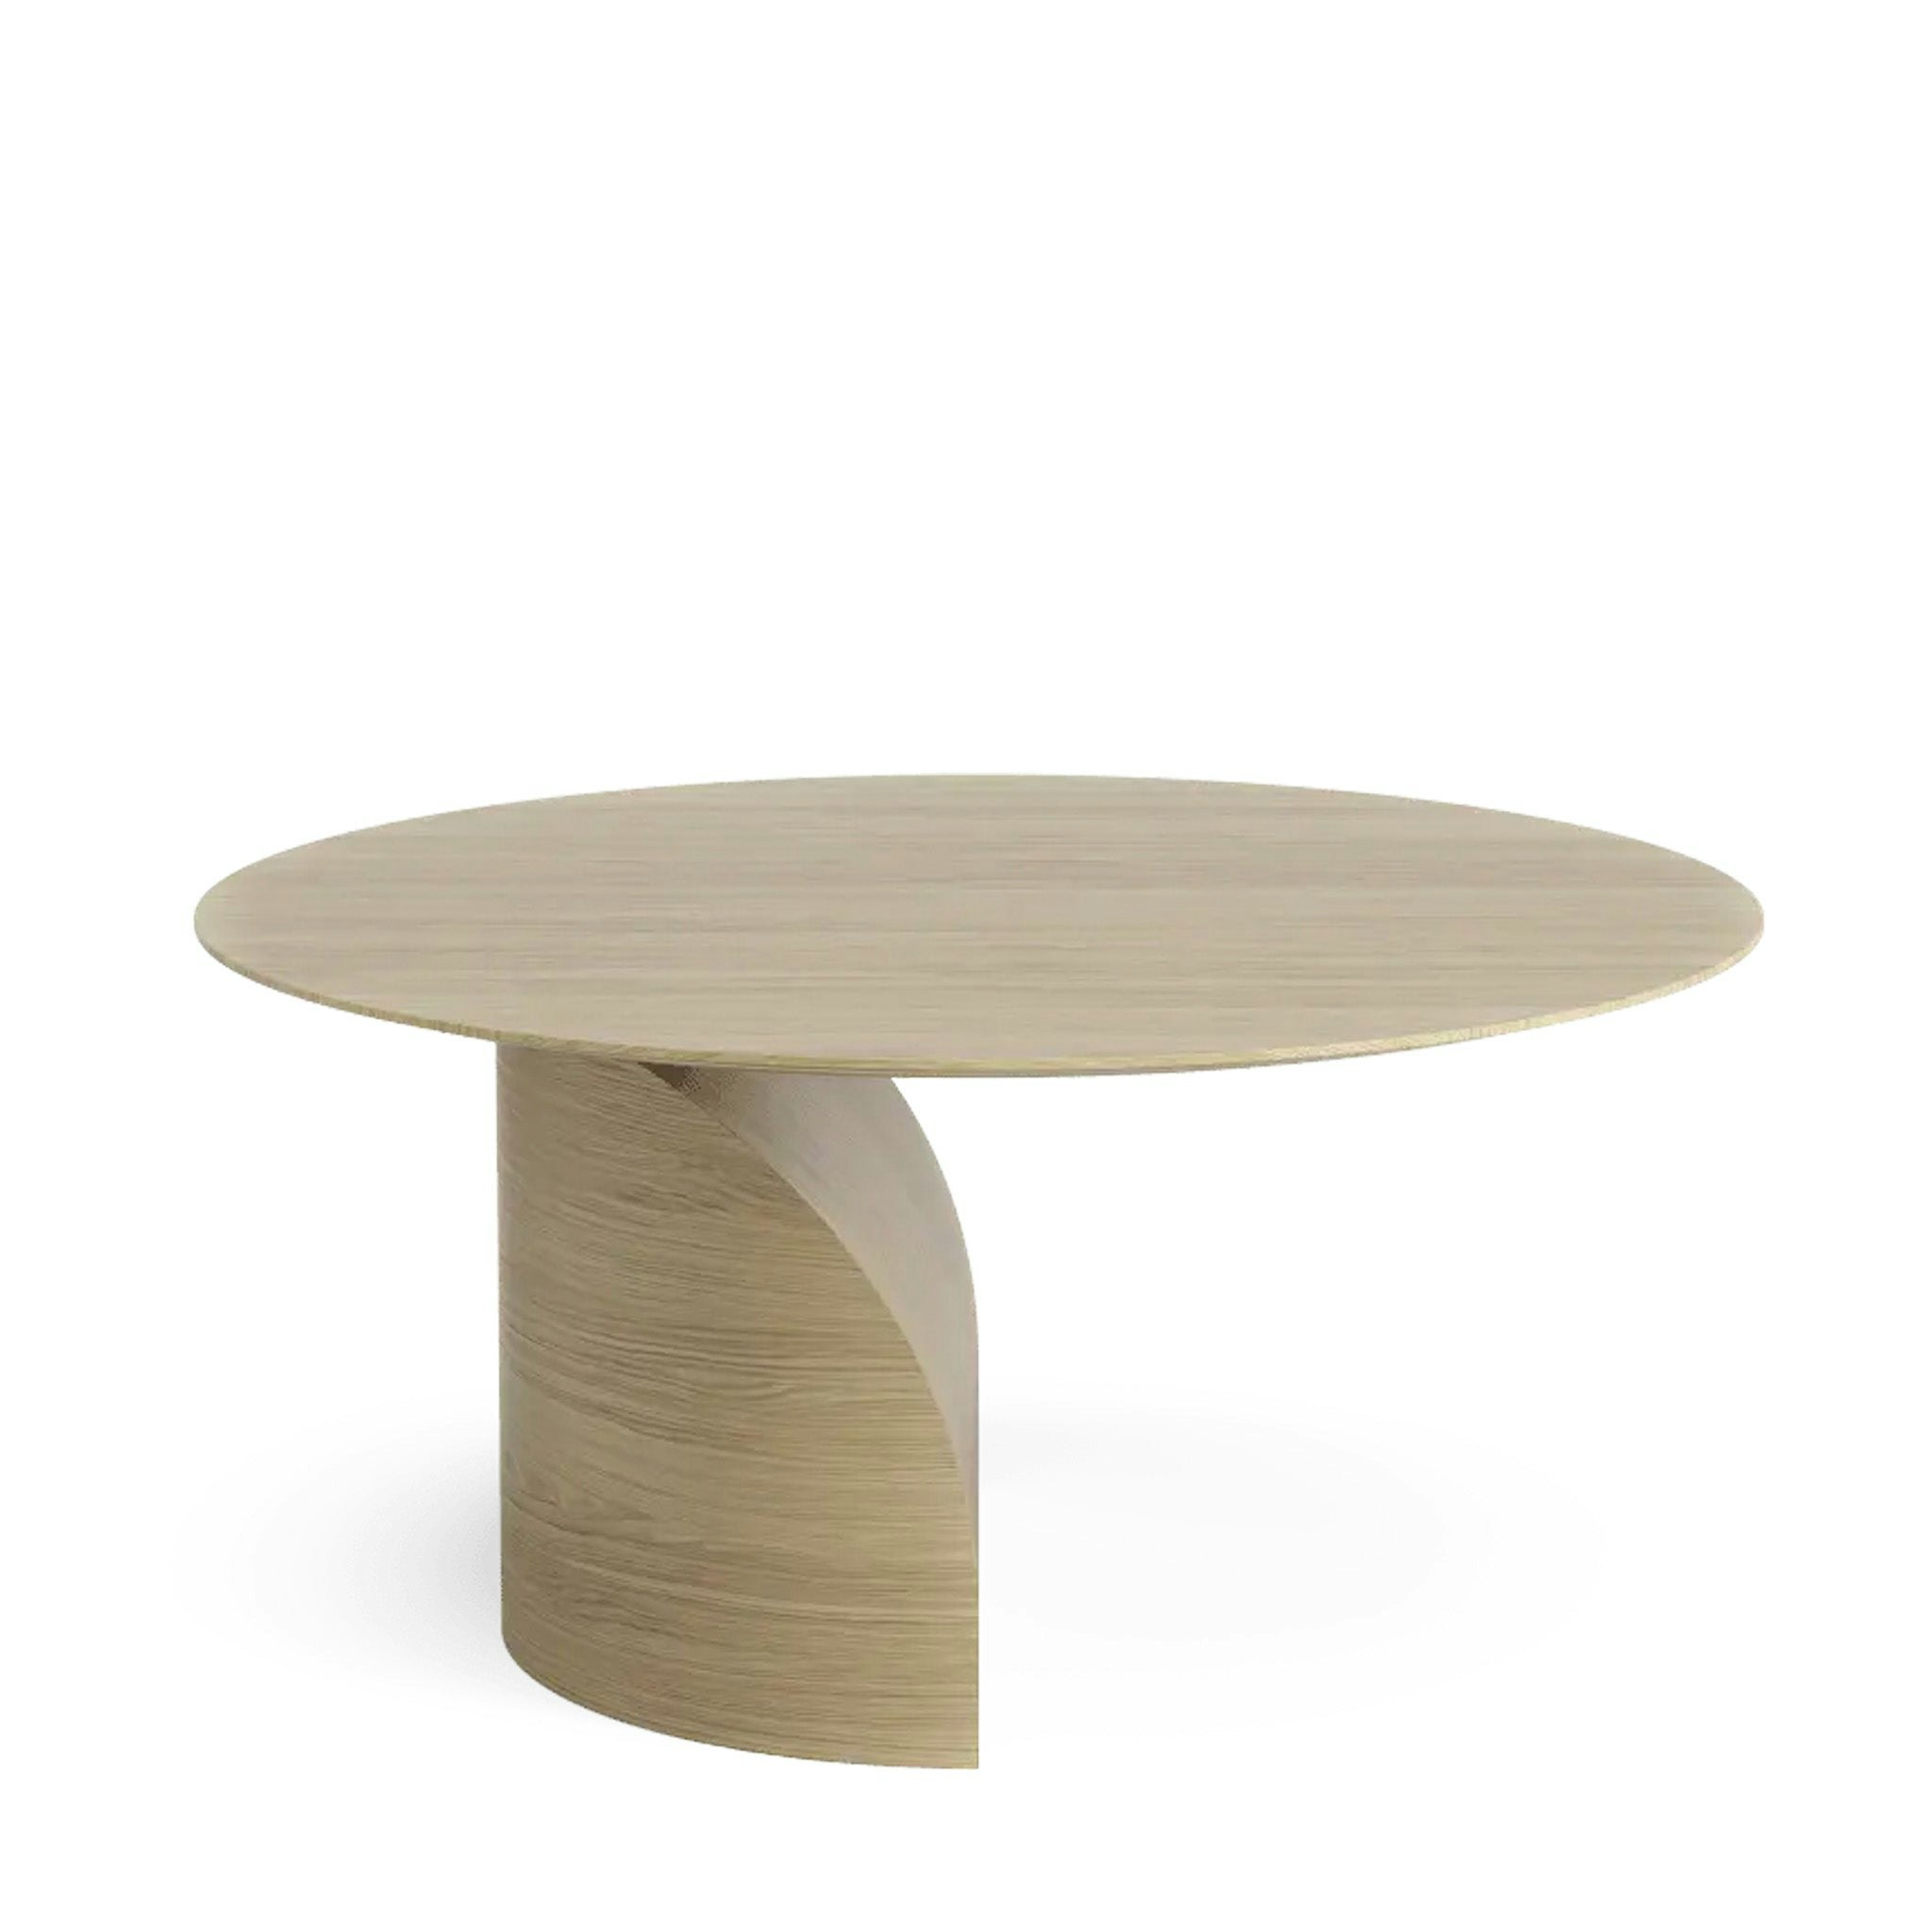 Savoa Table By Swedese